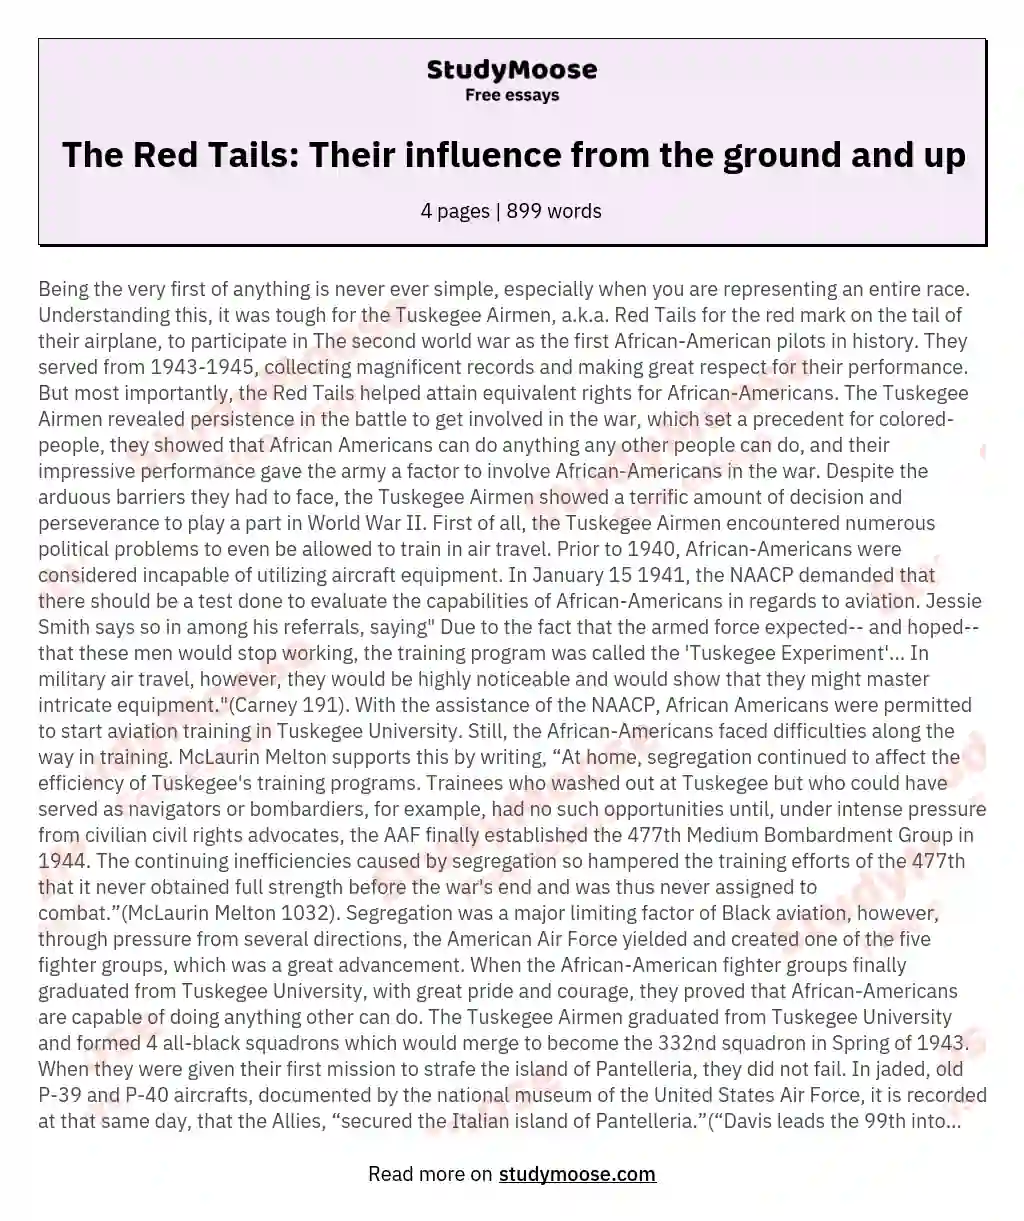 The Red Tails: Their influence from the ground and up essay